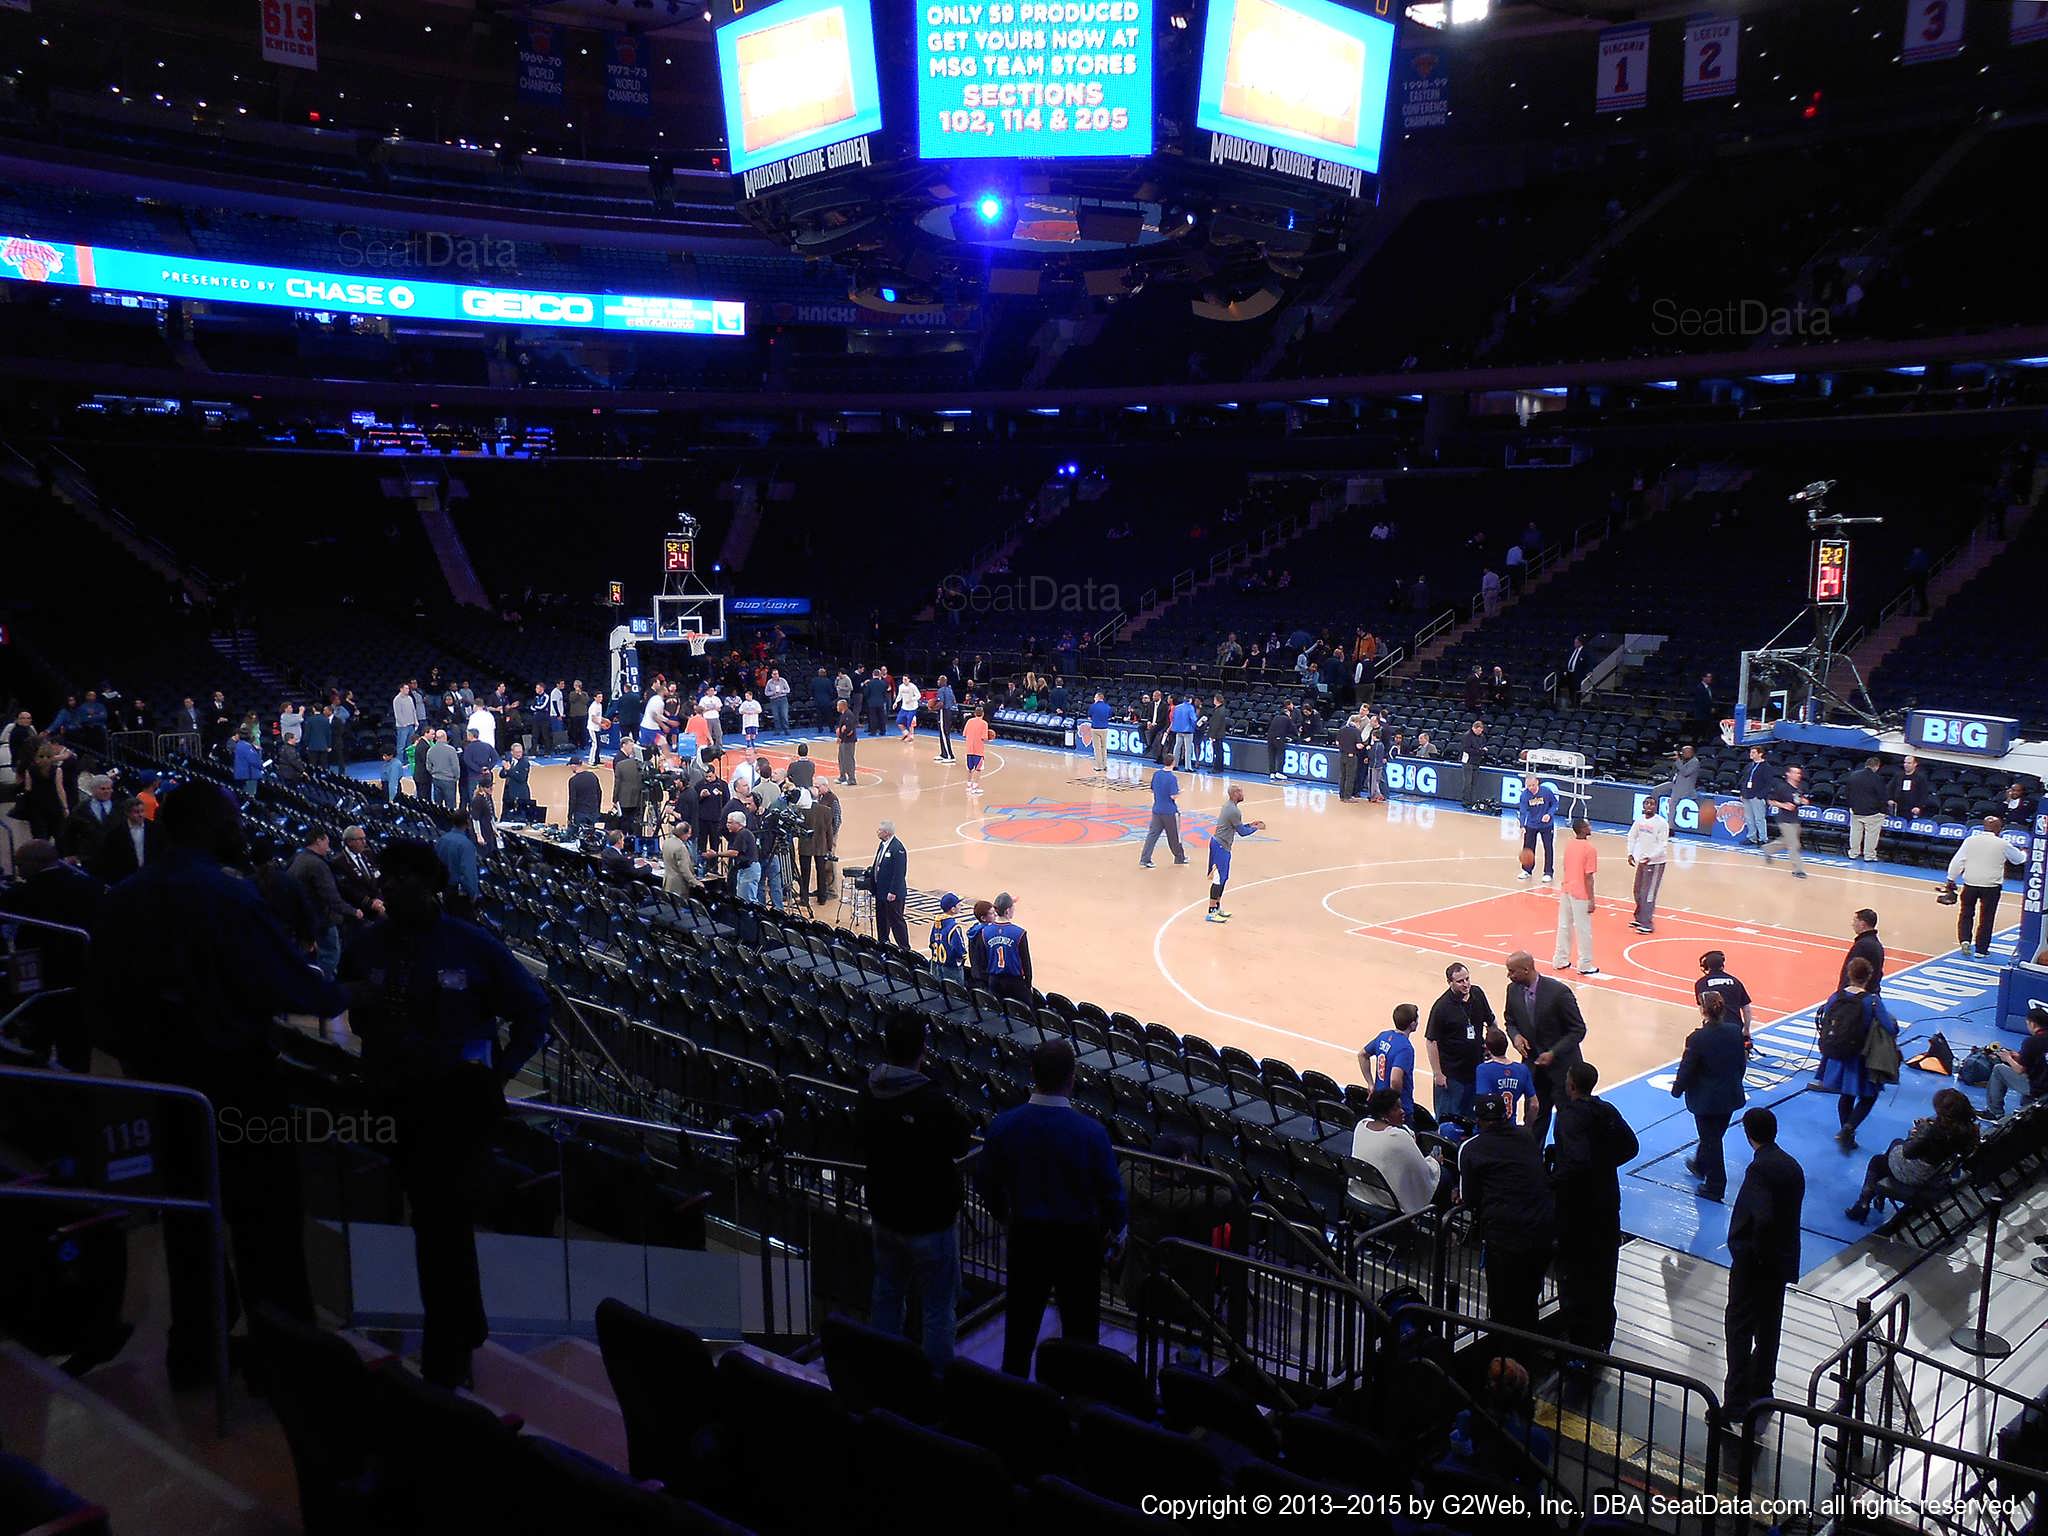 Seat view from section 119 at Madison Square Garden, home of the New York Knicks.